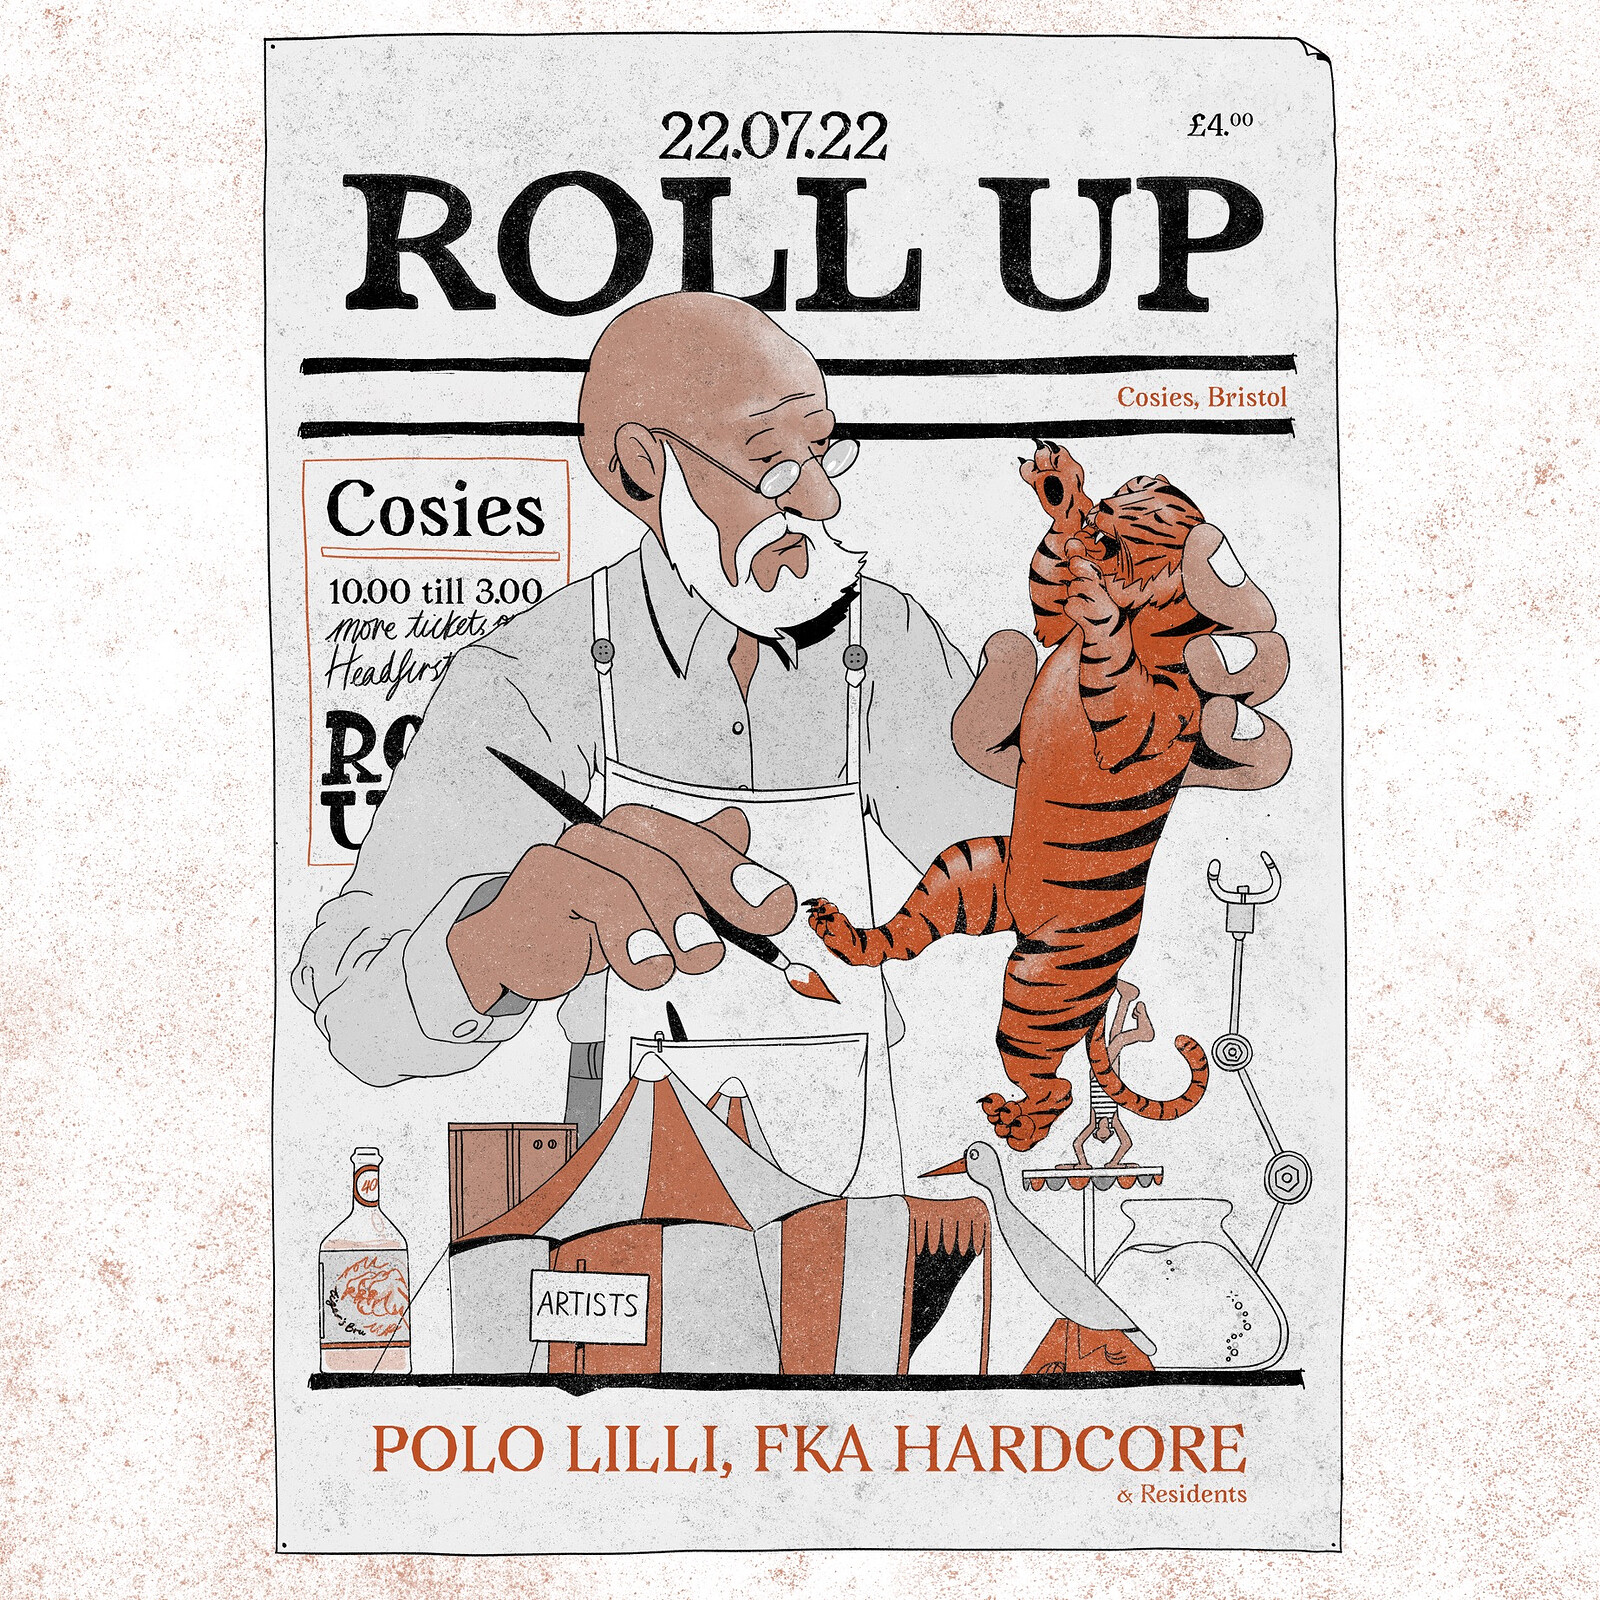 ROLL UP PRES. / POLO LILLI & FKA HARDCORE at Cosies